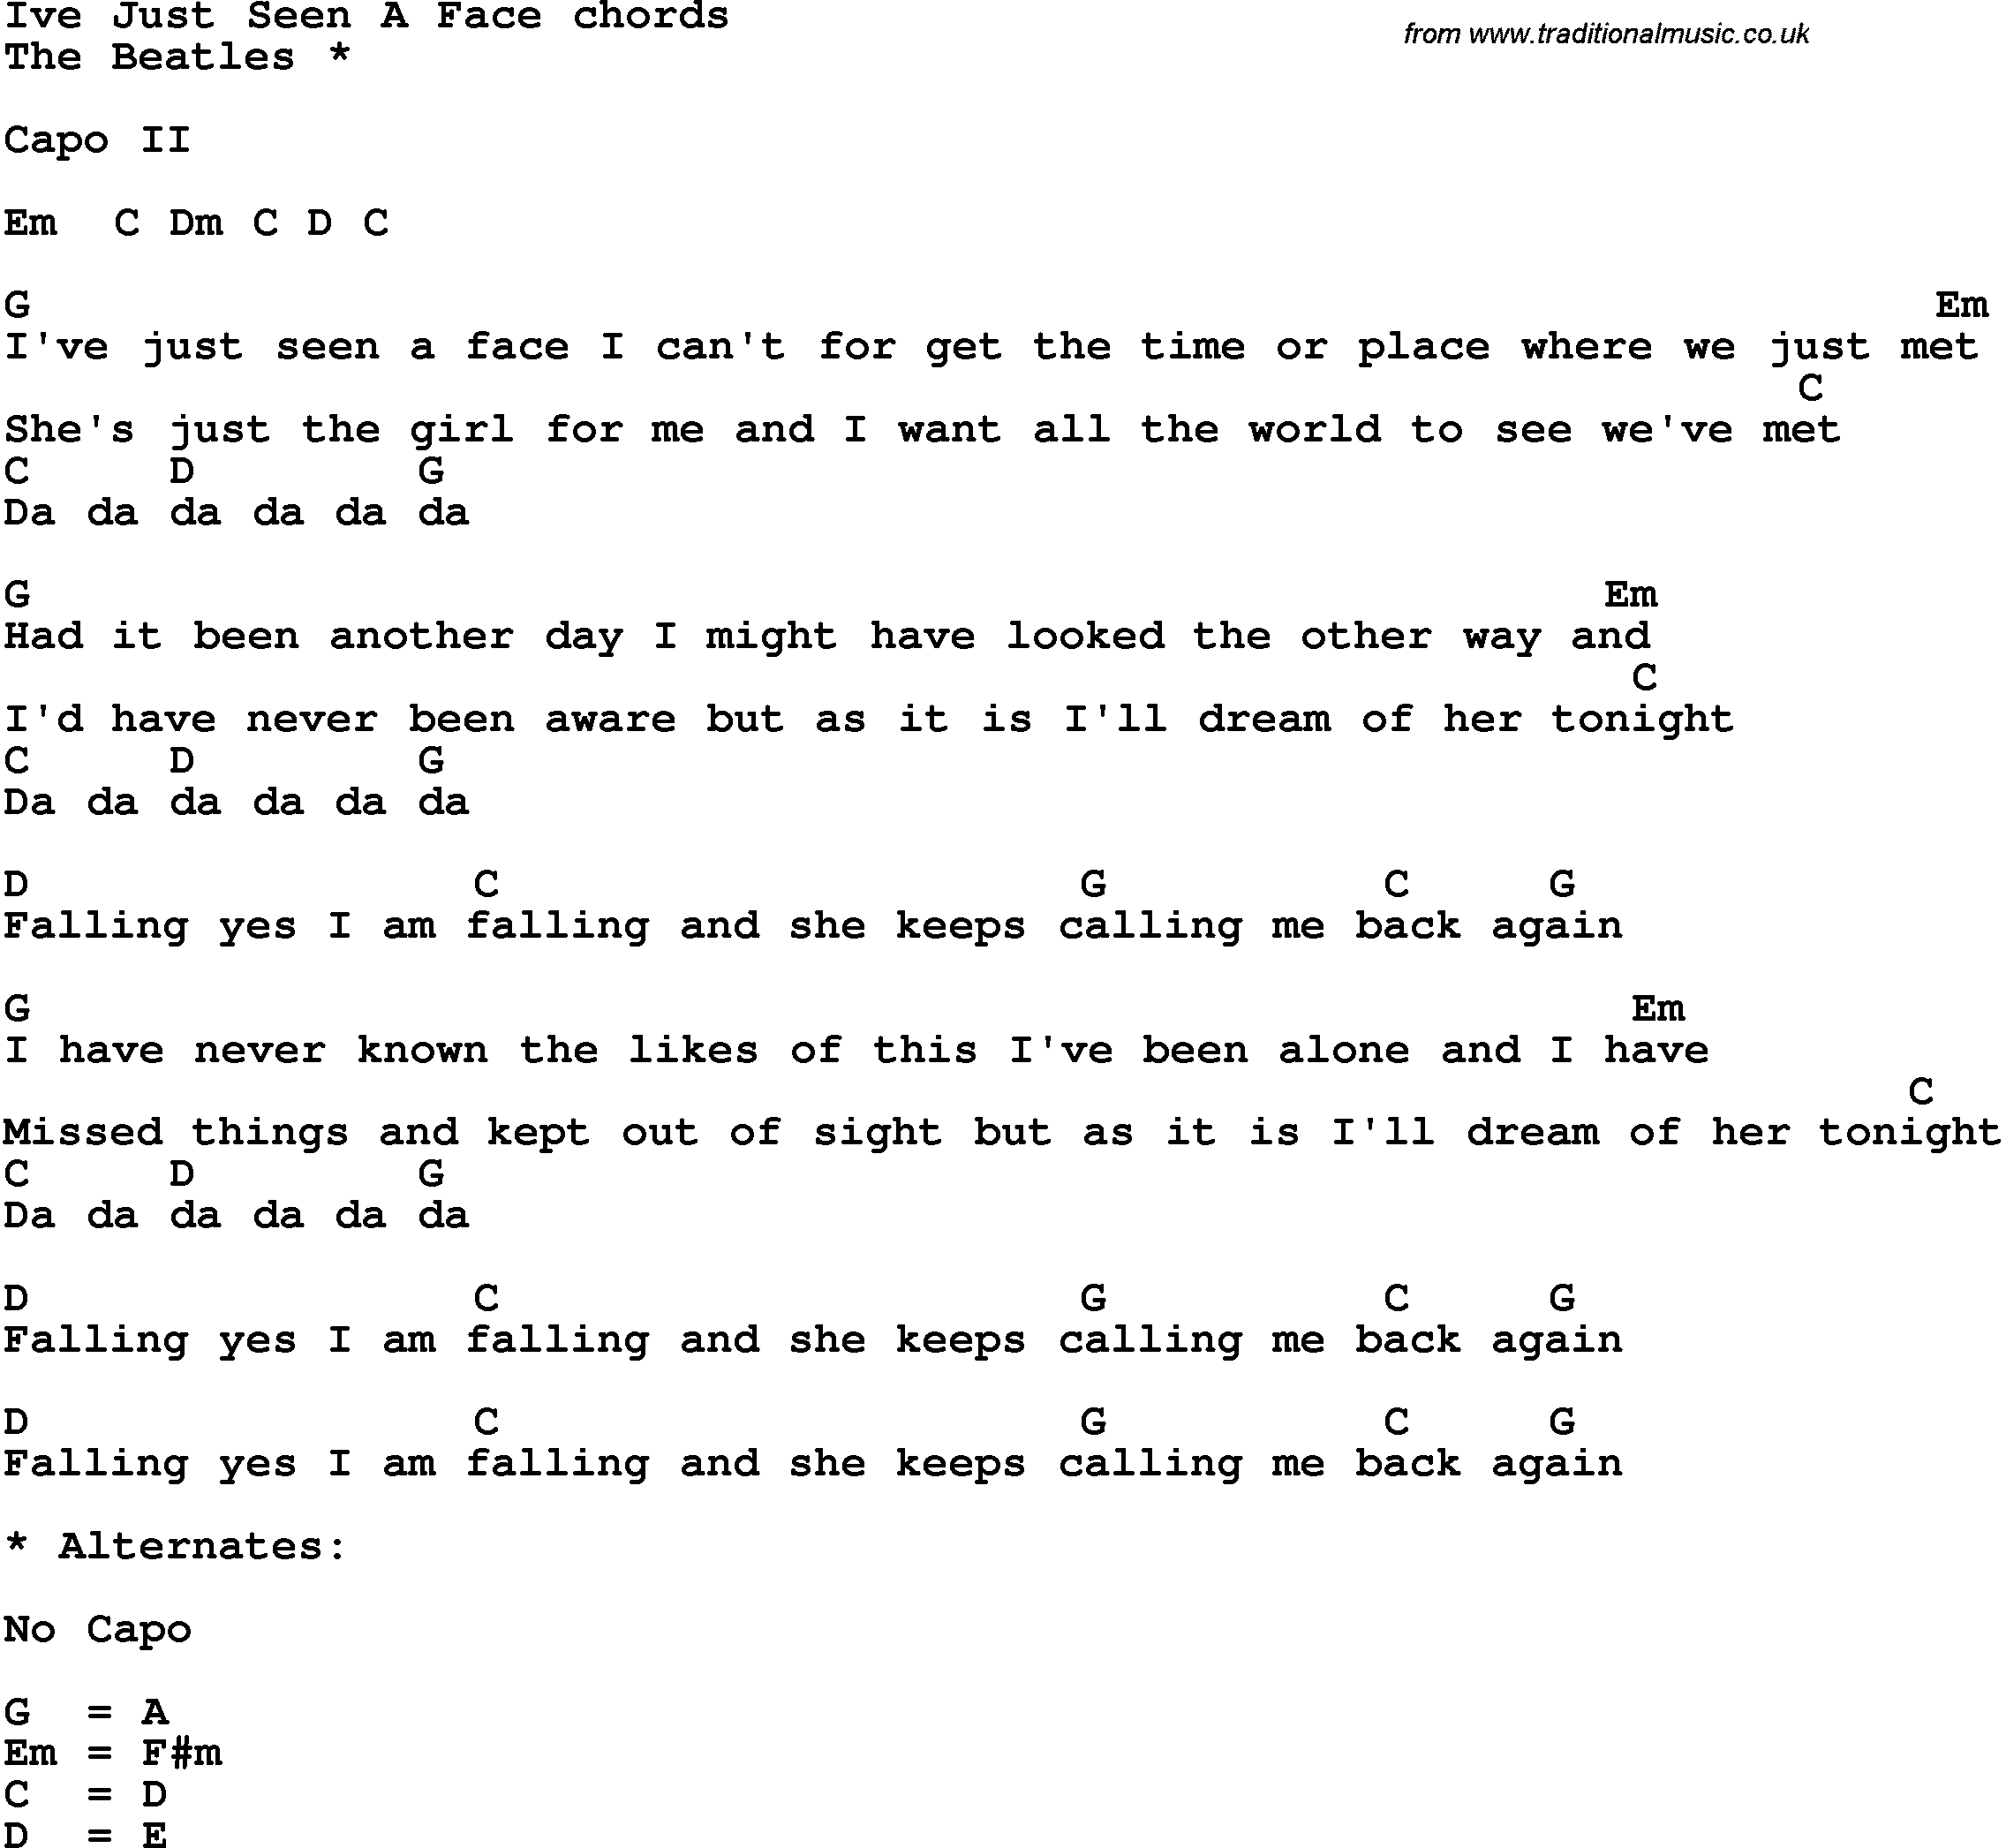 Song Lyrics with guitar chords for I've Just Seen A Face